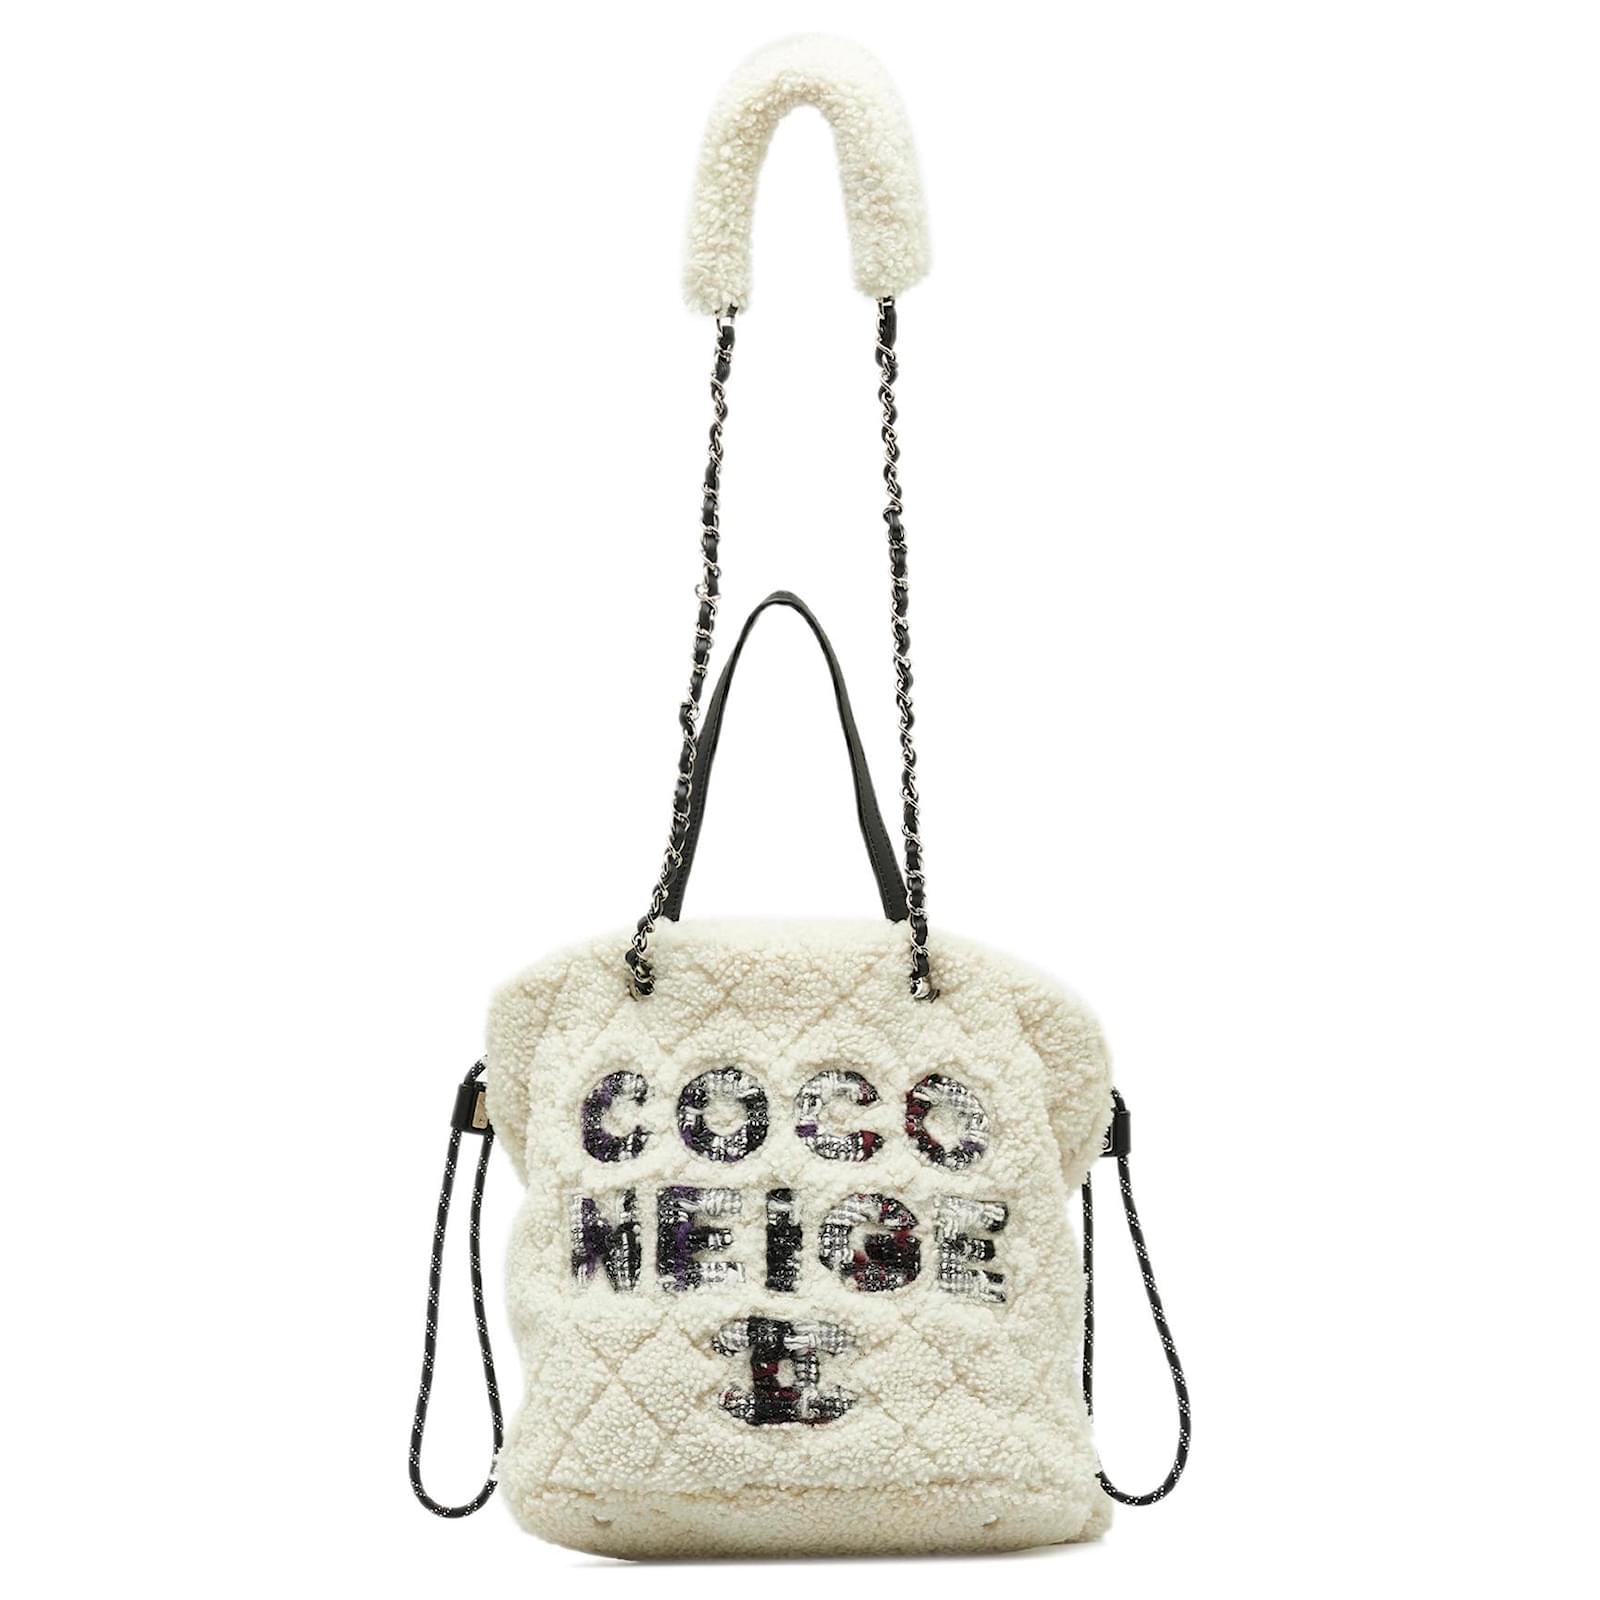 Chanel White Shearling Coco Neige Tote